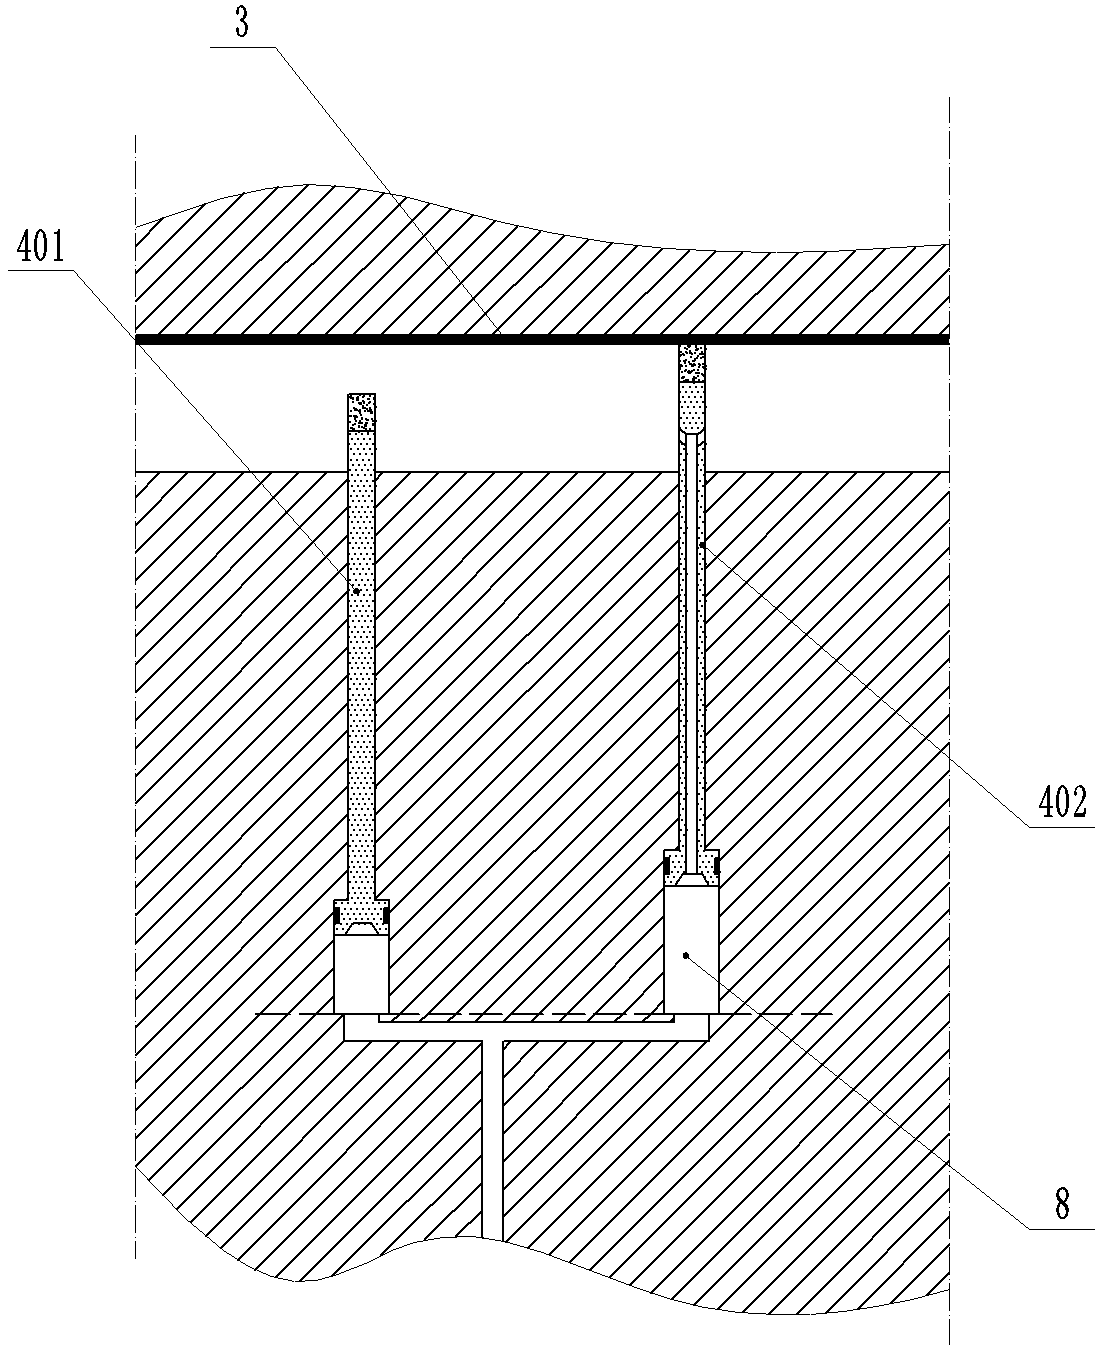 Secondary ejection mechanism for complex plastic product structure